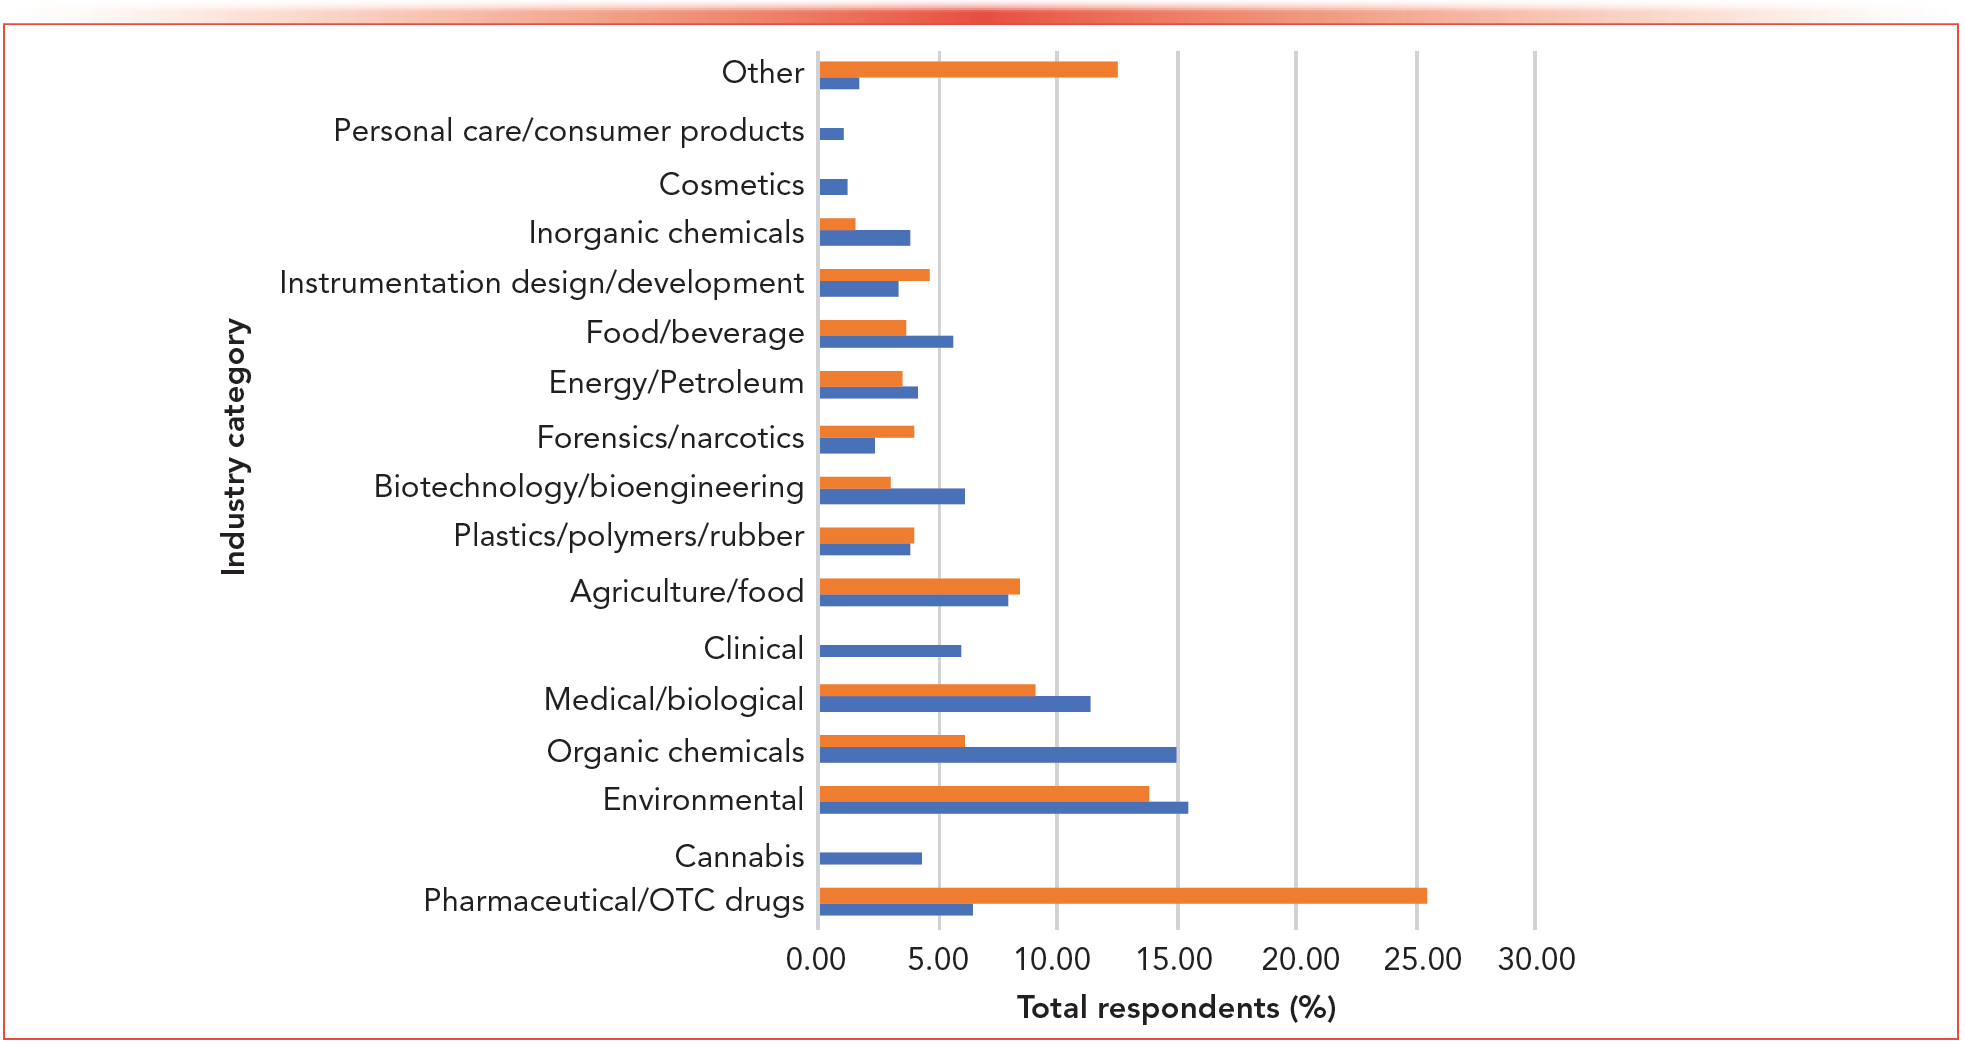 FIGURE 1: Fields of work of survey respondents in 2013 (red) and 2023 (blue) as a percentage of total respondents. The “Other” category includes flavors and fragrances, illicit drugs, natural products, electronics, paper chemicals, and fermentation broths. Note that cannabis, clinical, cosmetics, and personal care/consumer products categories are new to this year’s survey.